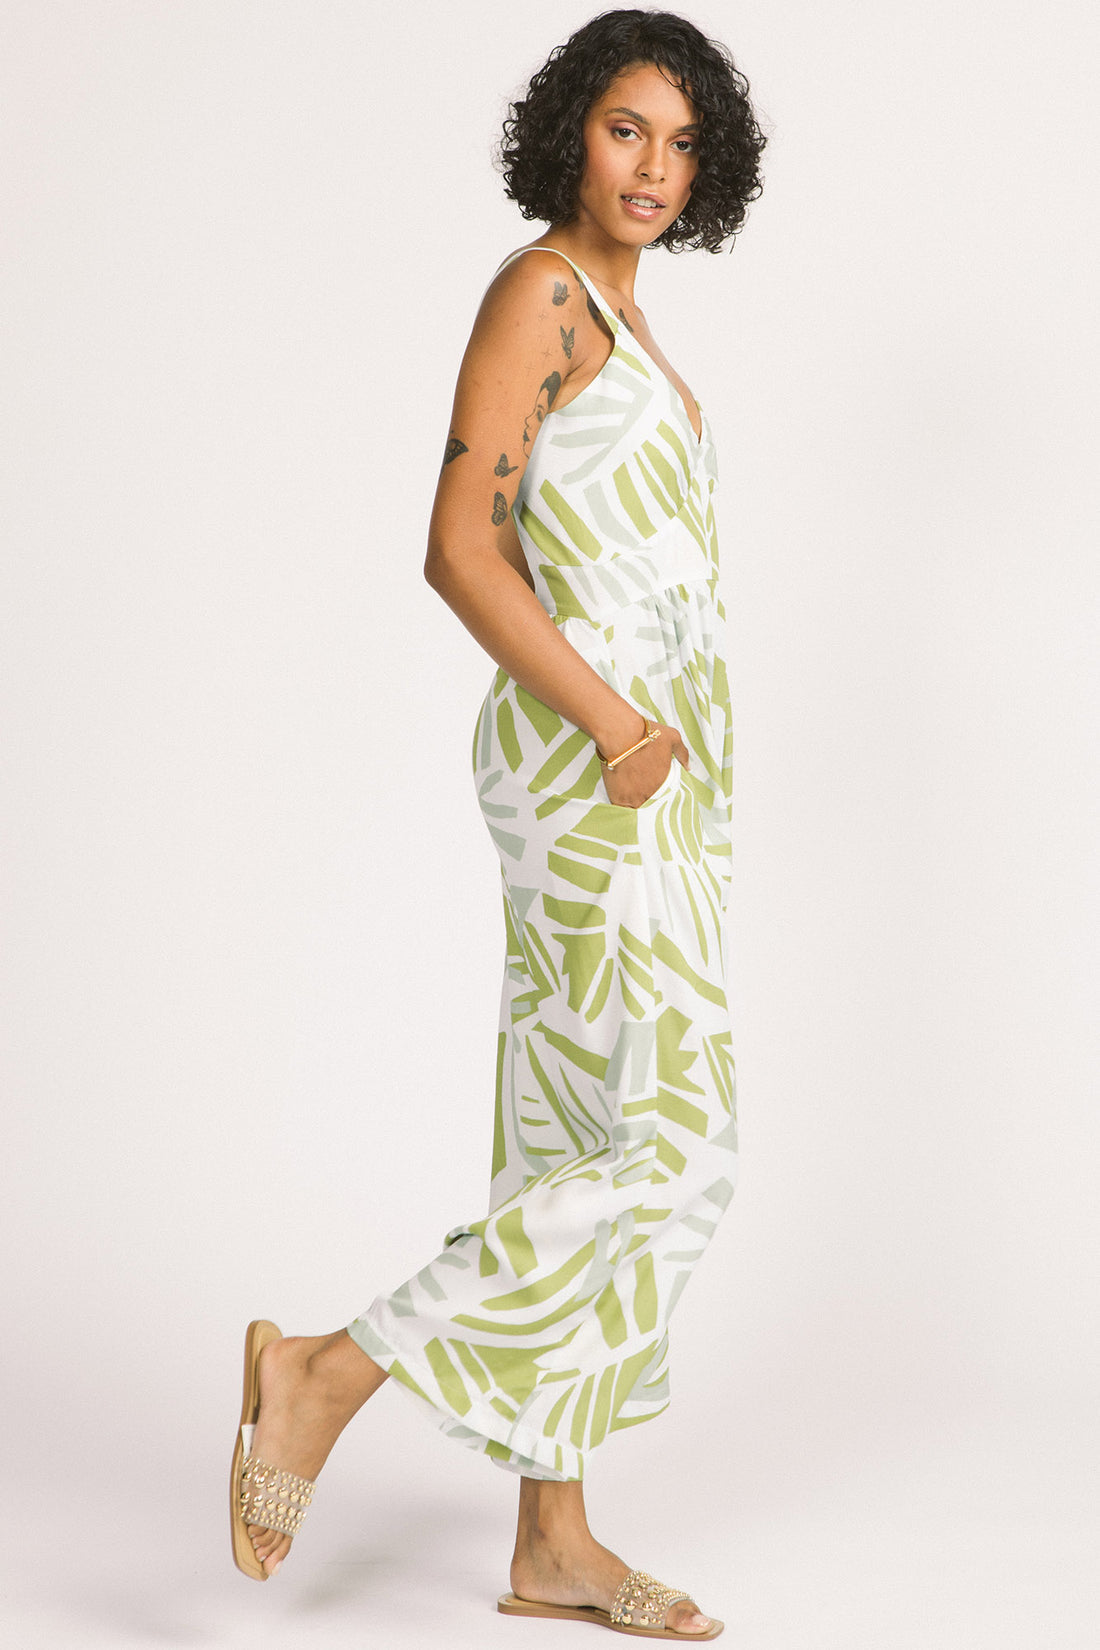 Zadie Jumpsuit by Allison Wonderland, Frond Leaf, sleeveless, wide straps, V-neck, gathers under bust, fitted waist, wide legs, pockets, eco-fabric, Lenzing Ecovero Viscose, sizes 2-12, made in Vancouver